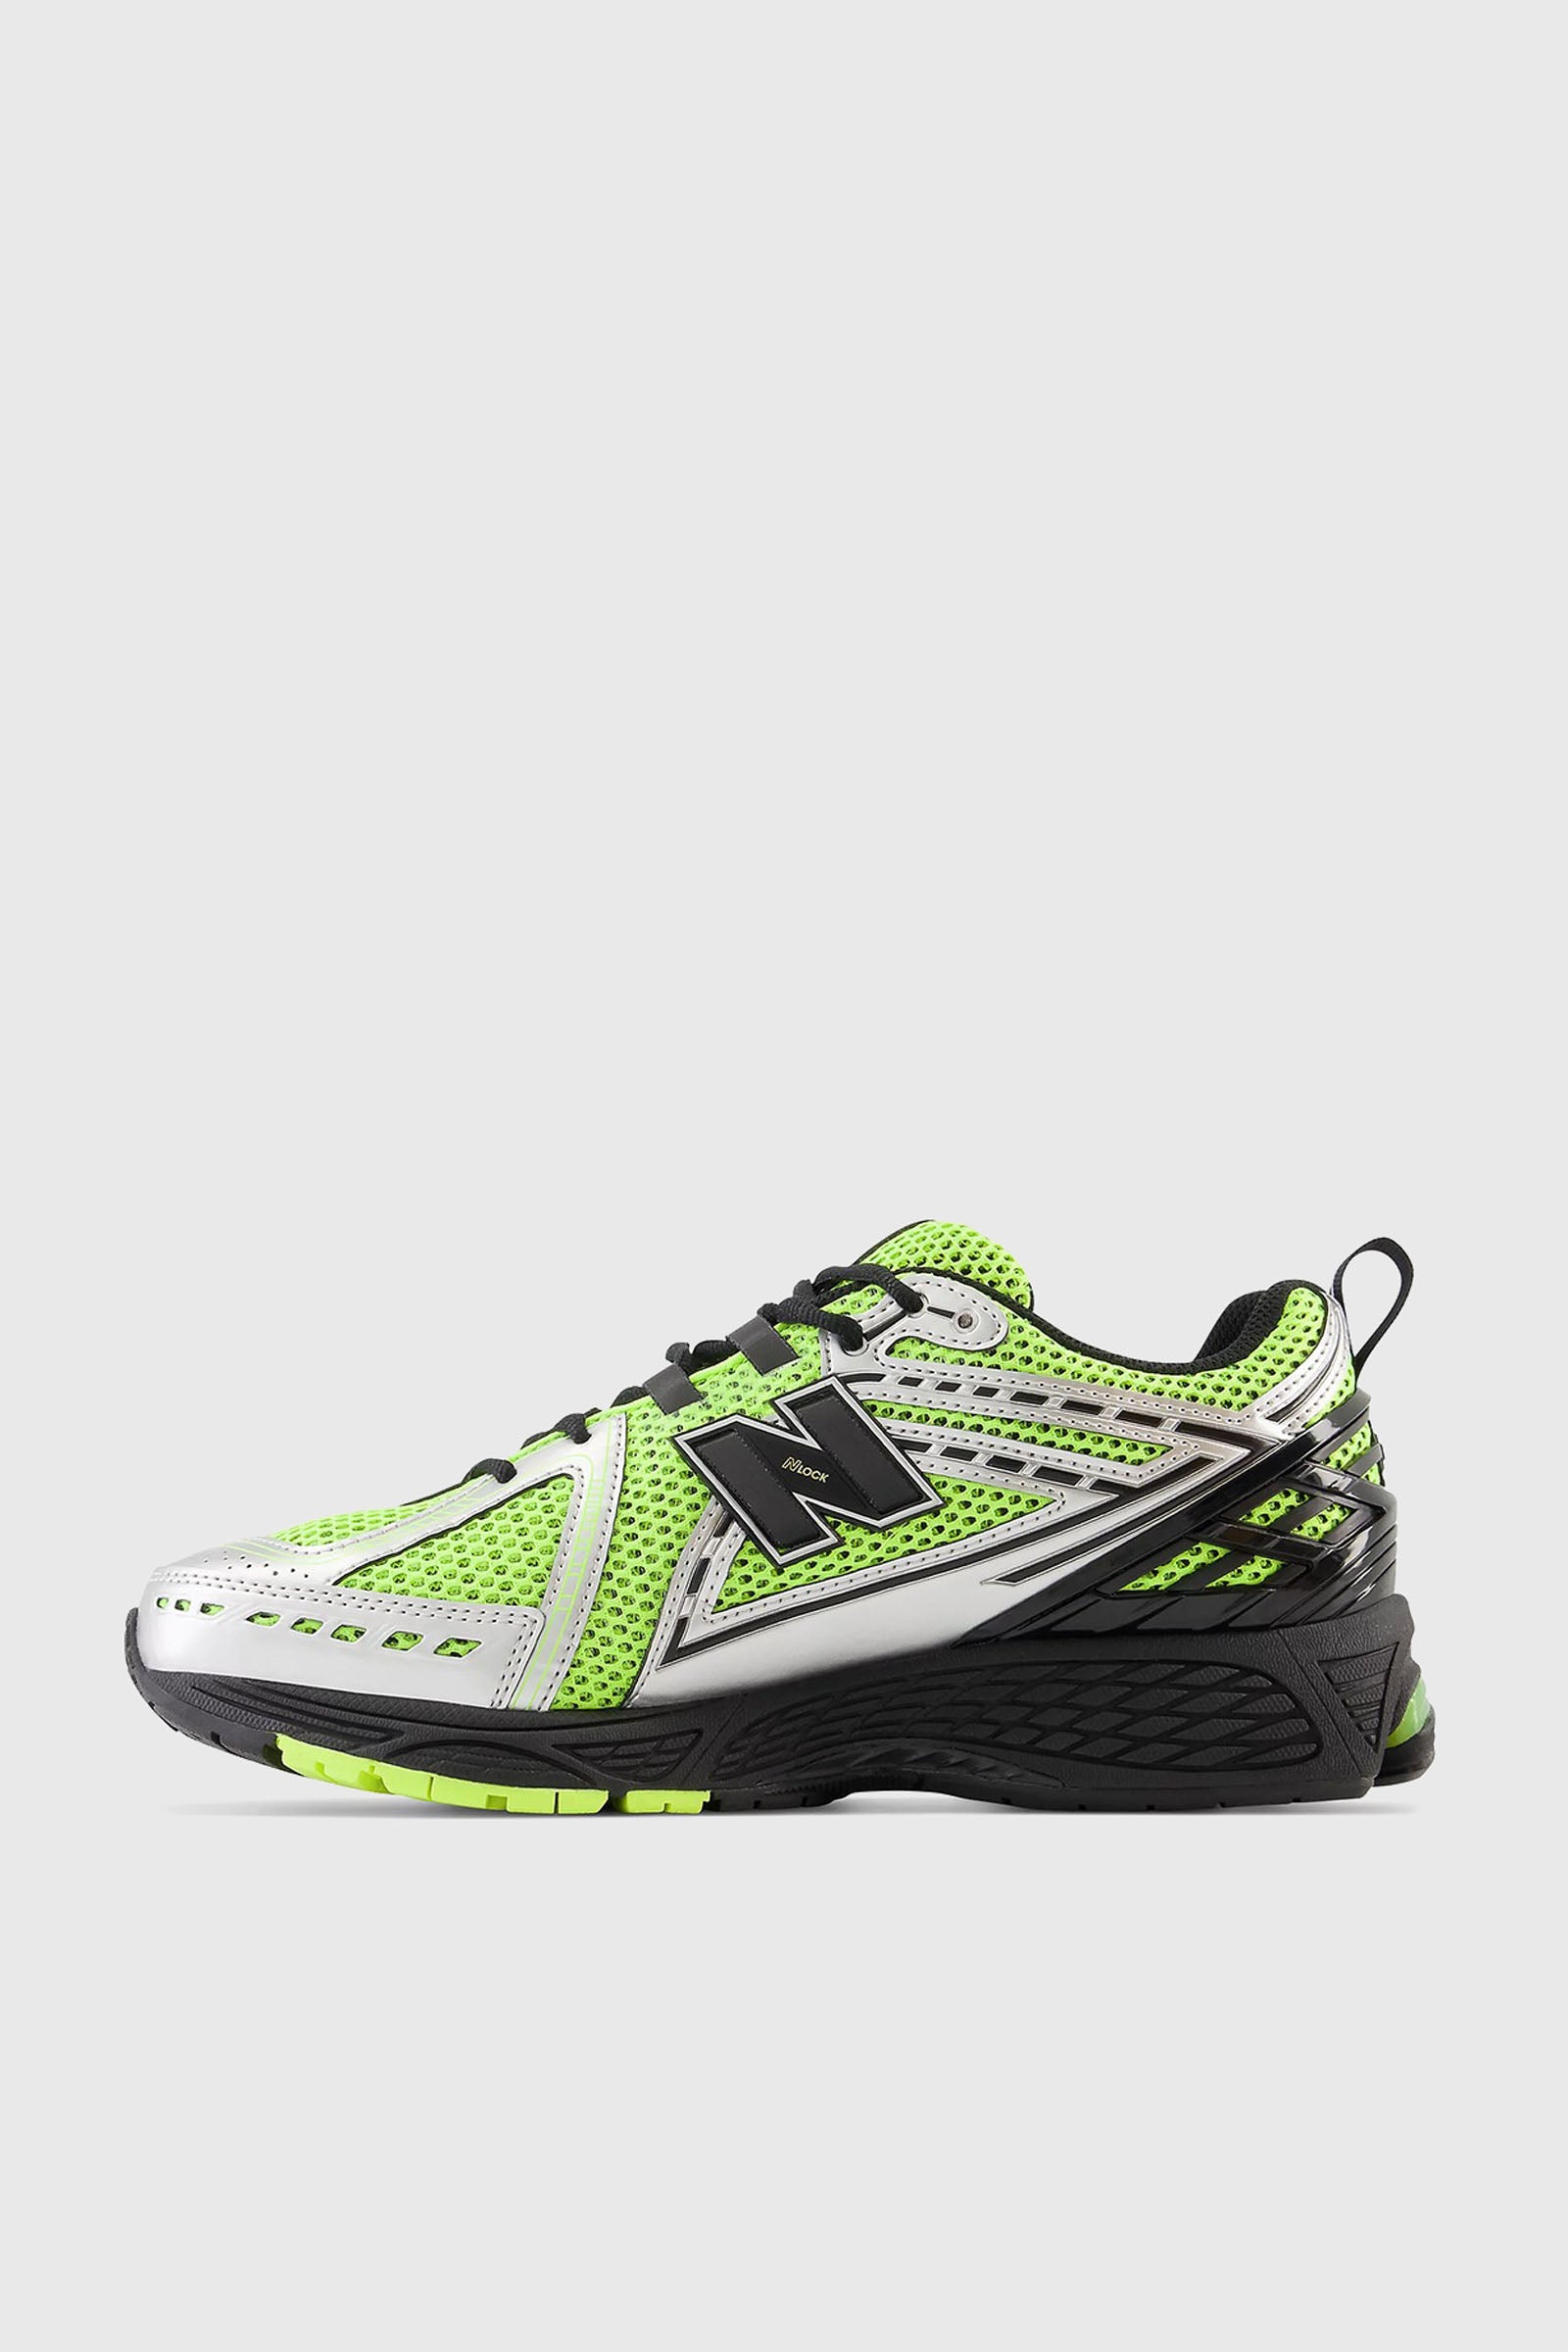 New Balance Sneaker Neon Green Synthetic - 6